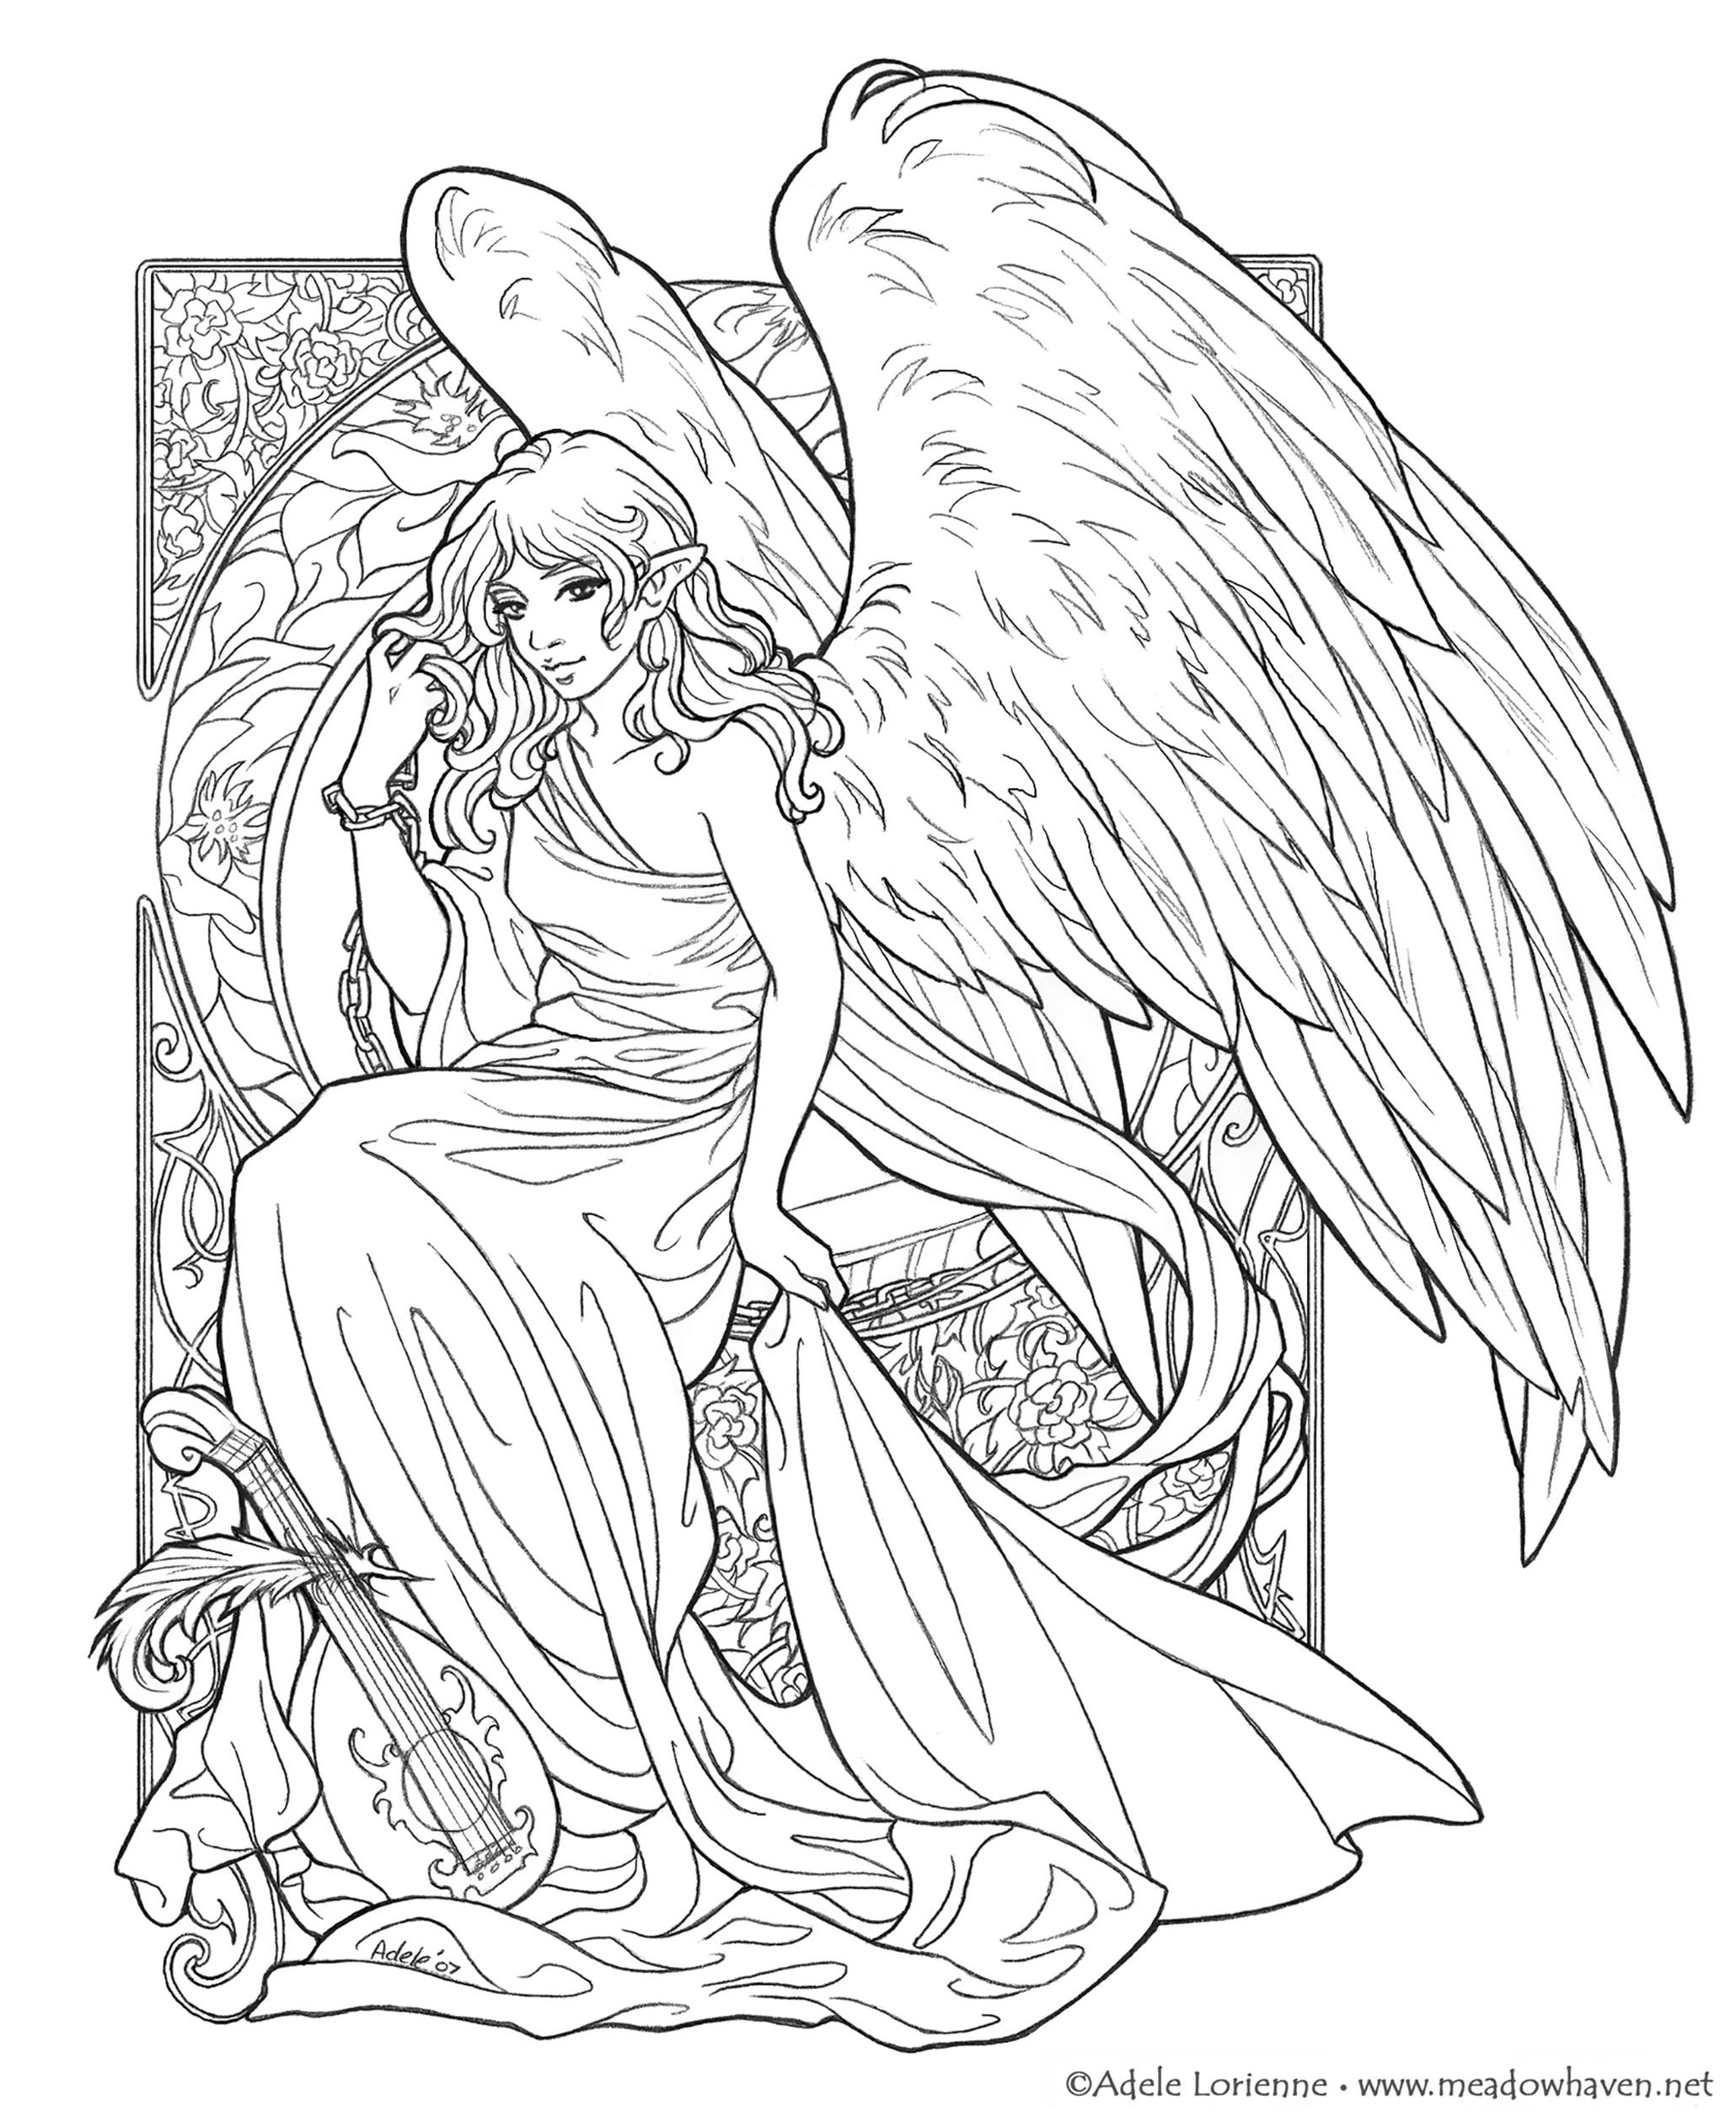 List 98+ Images free printable fantasy coloring pages for adults Sharp